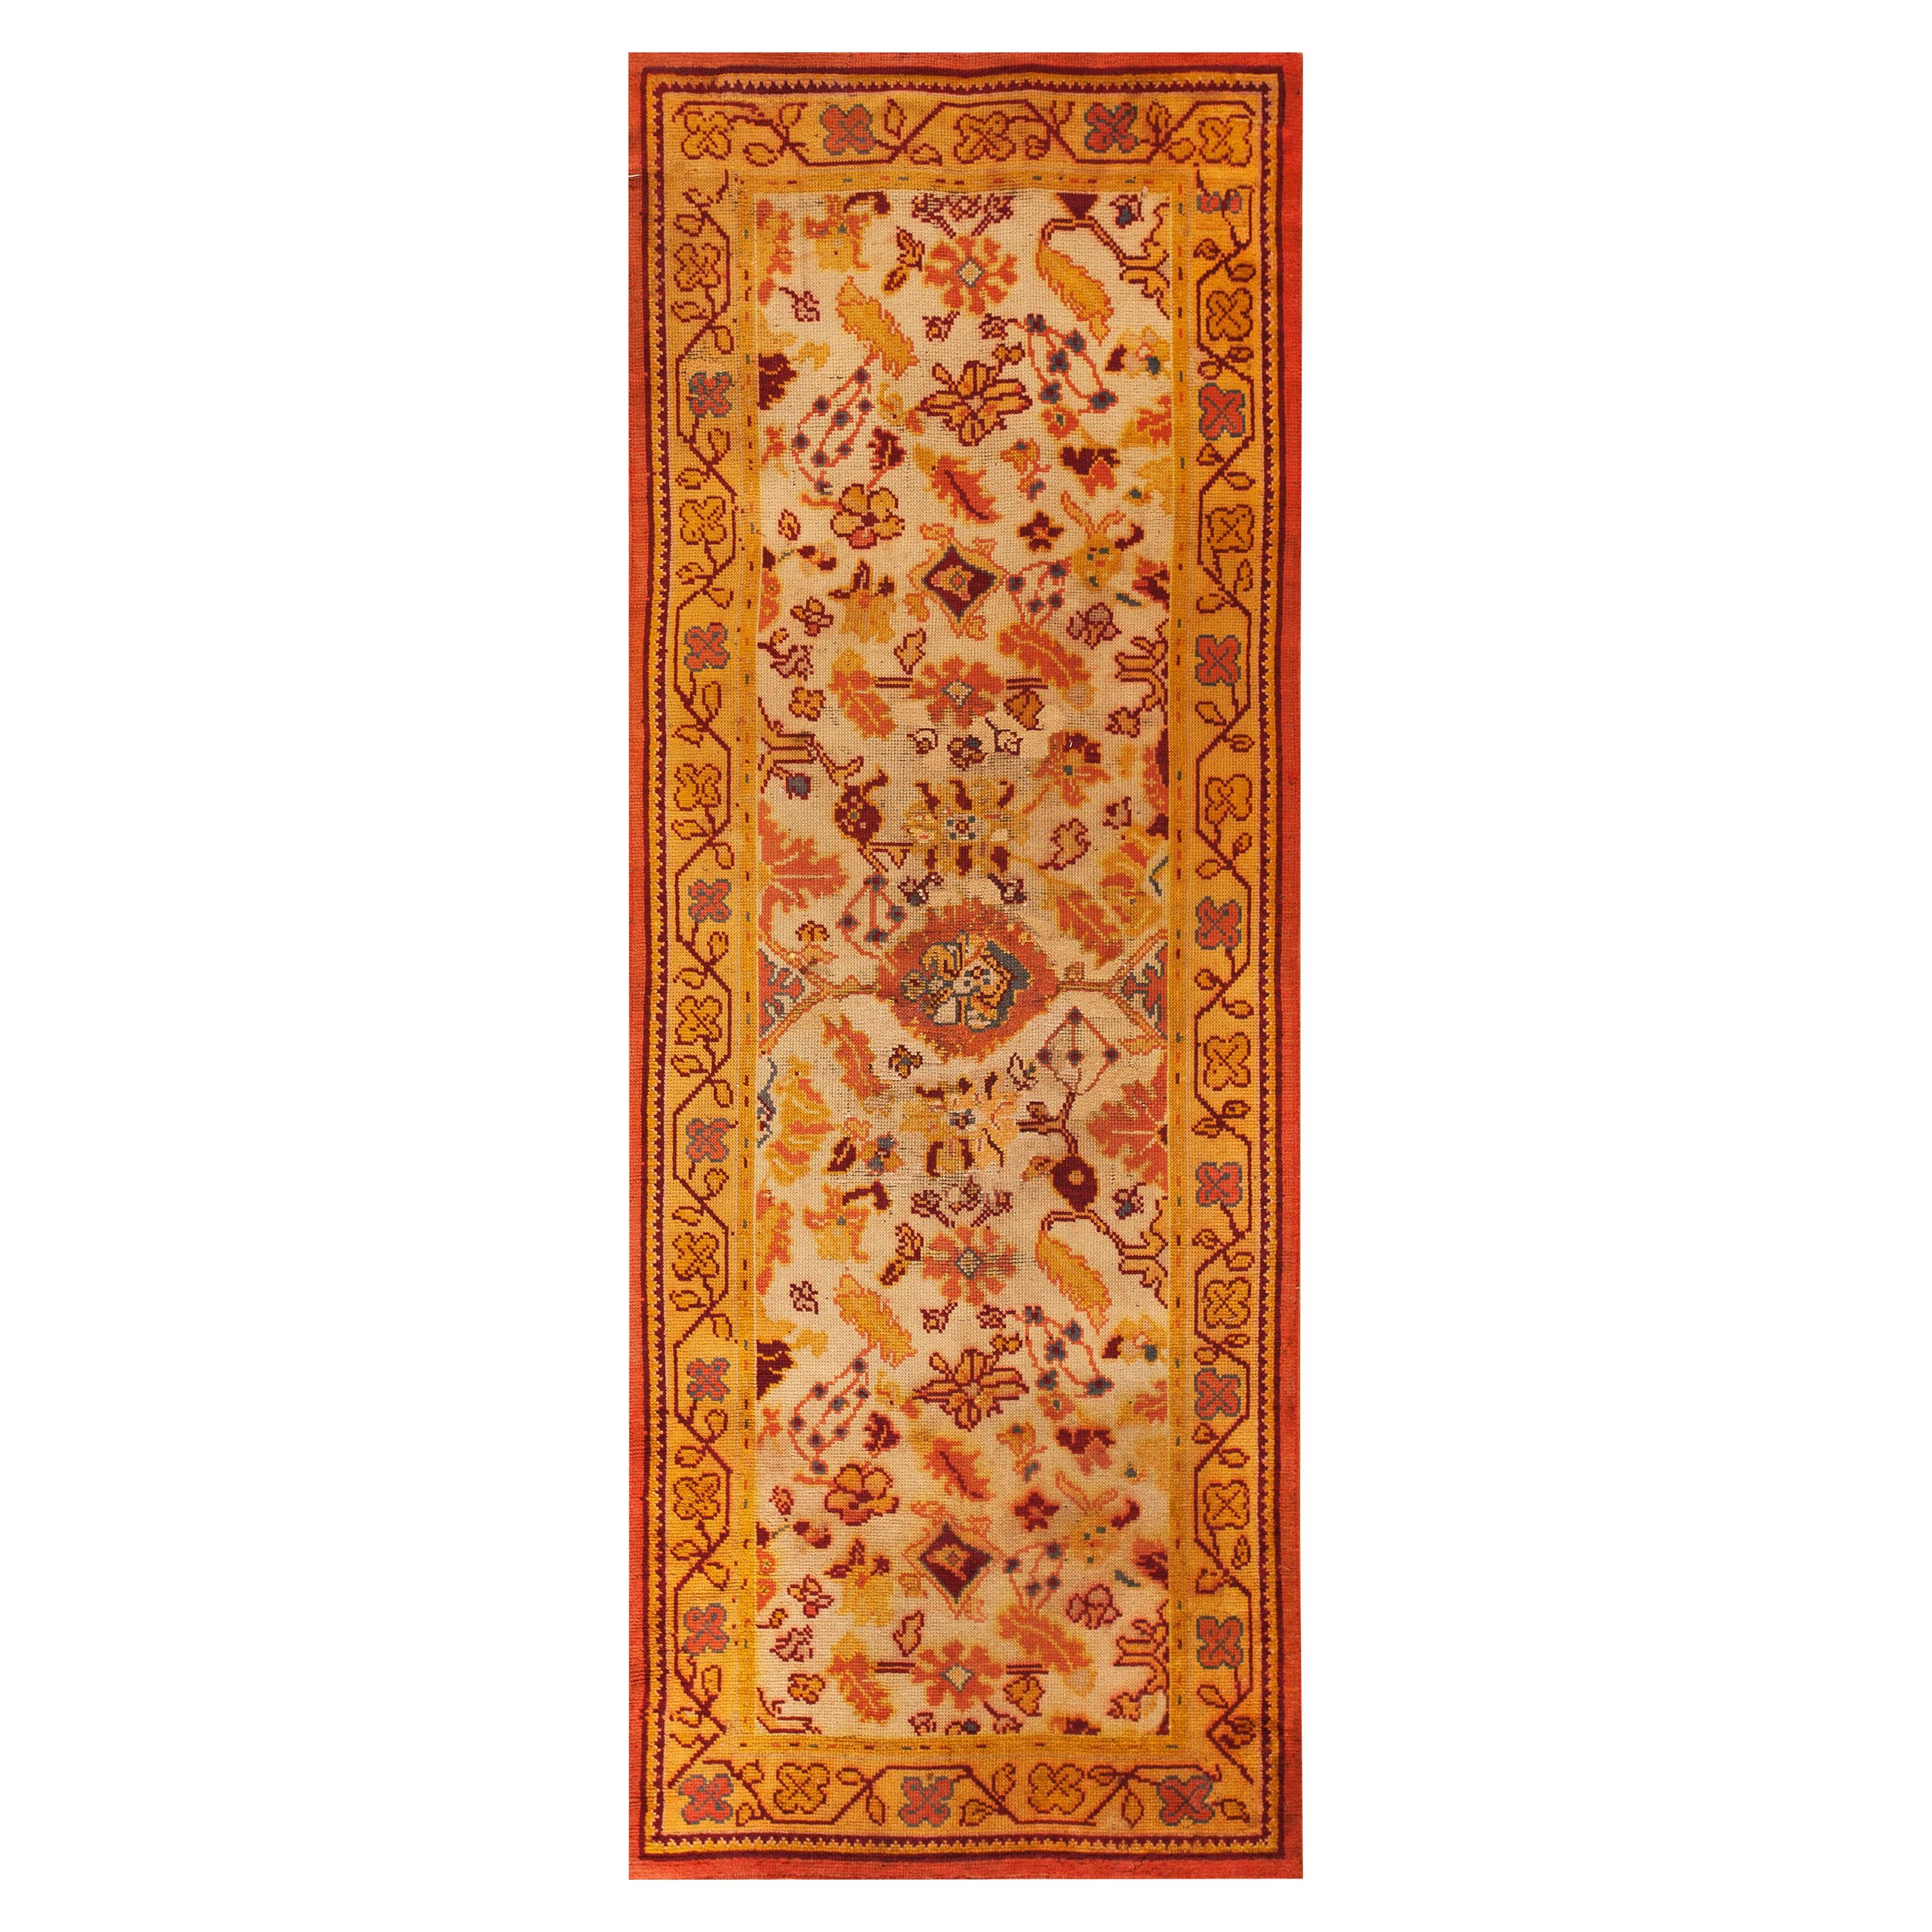 Early 20th Century Donegal Arts & Crafts Carpet ( 4'6" x 9' - 137 x 358 cm ) For Sale